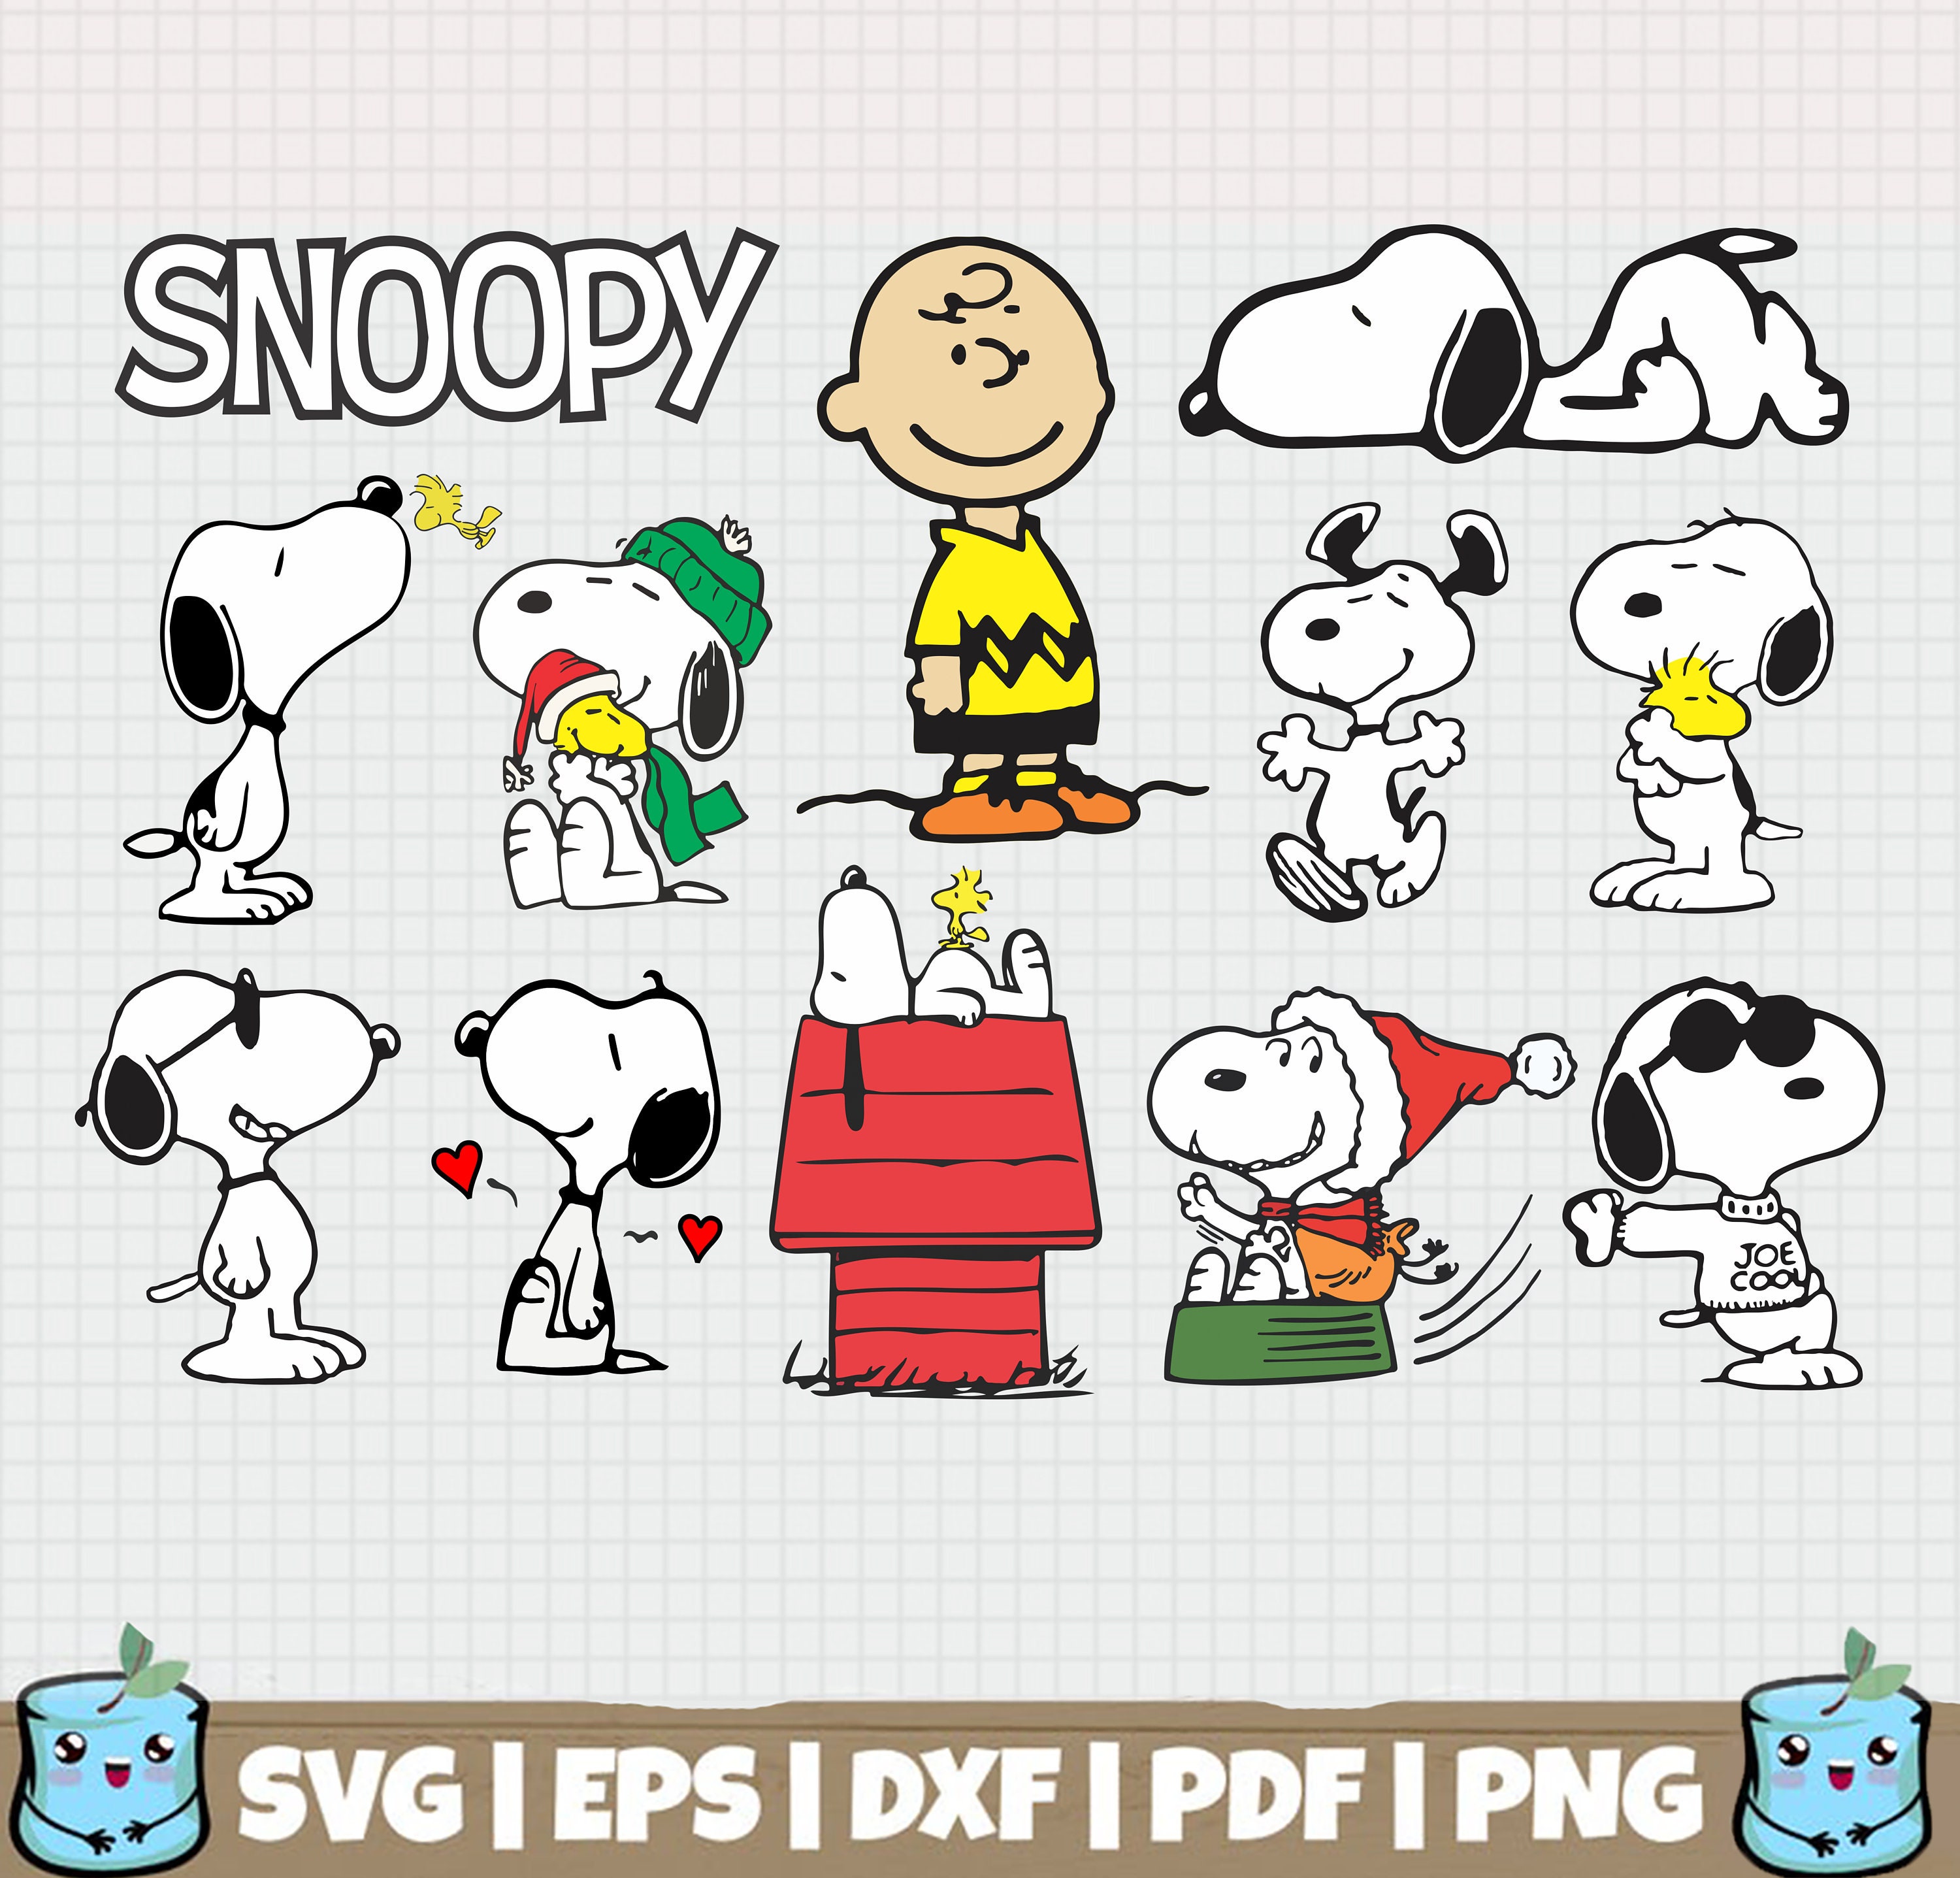 Snoopy/Peanuts Candy Like Stickers, The Peanuts Gang Happy Mail, Harley,  Junk Journal, Skating, Deco Stickers, Stationery, Collecting.